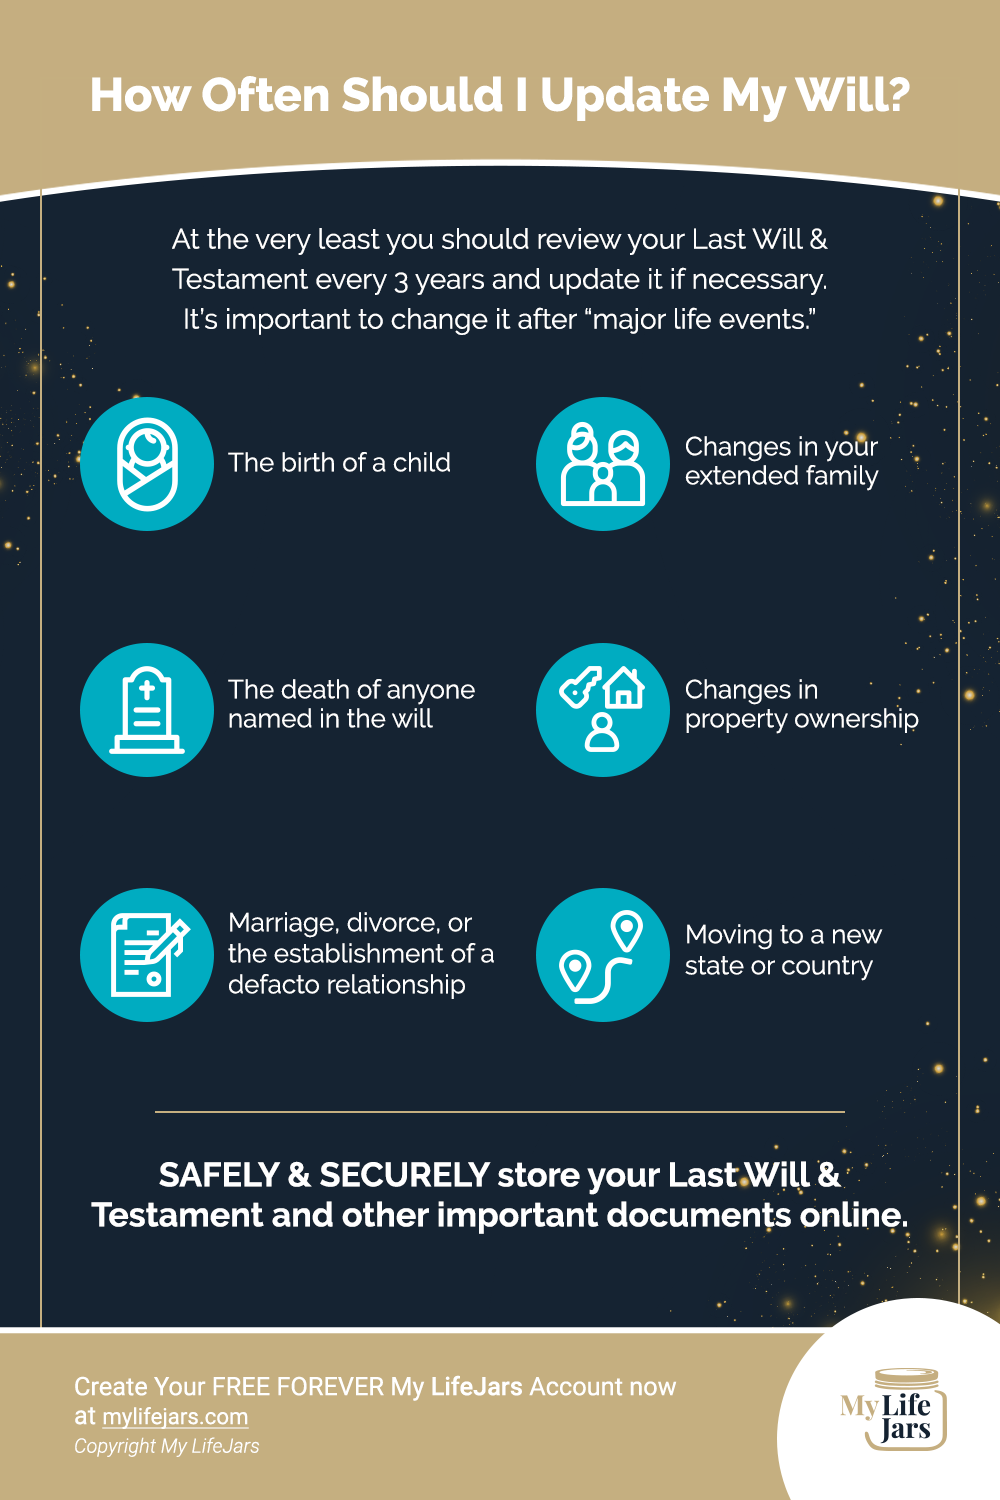 an infographic with a navy and gold background, turquoise icons showing how often and when you should update your last will and testament